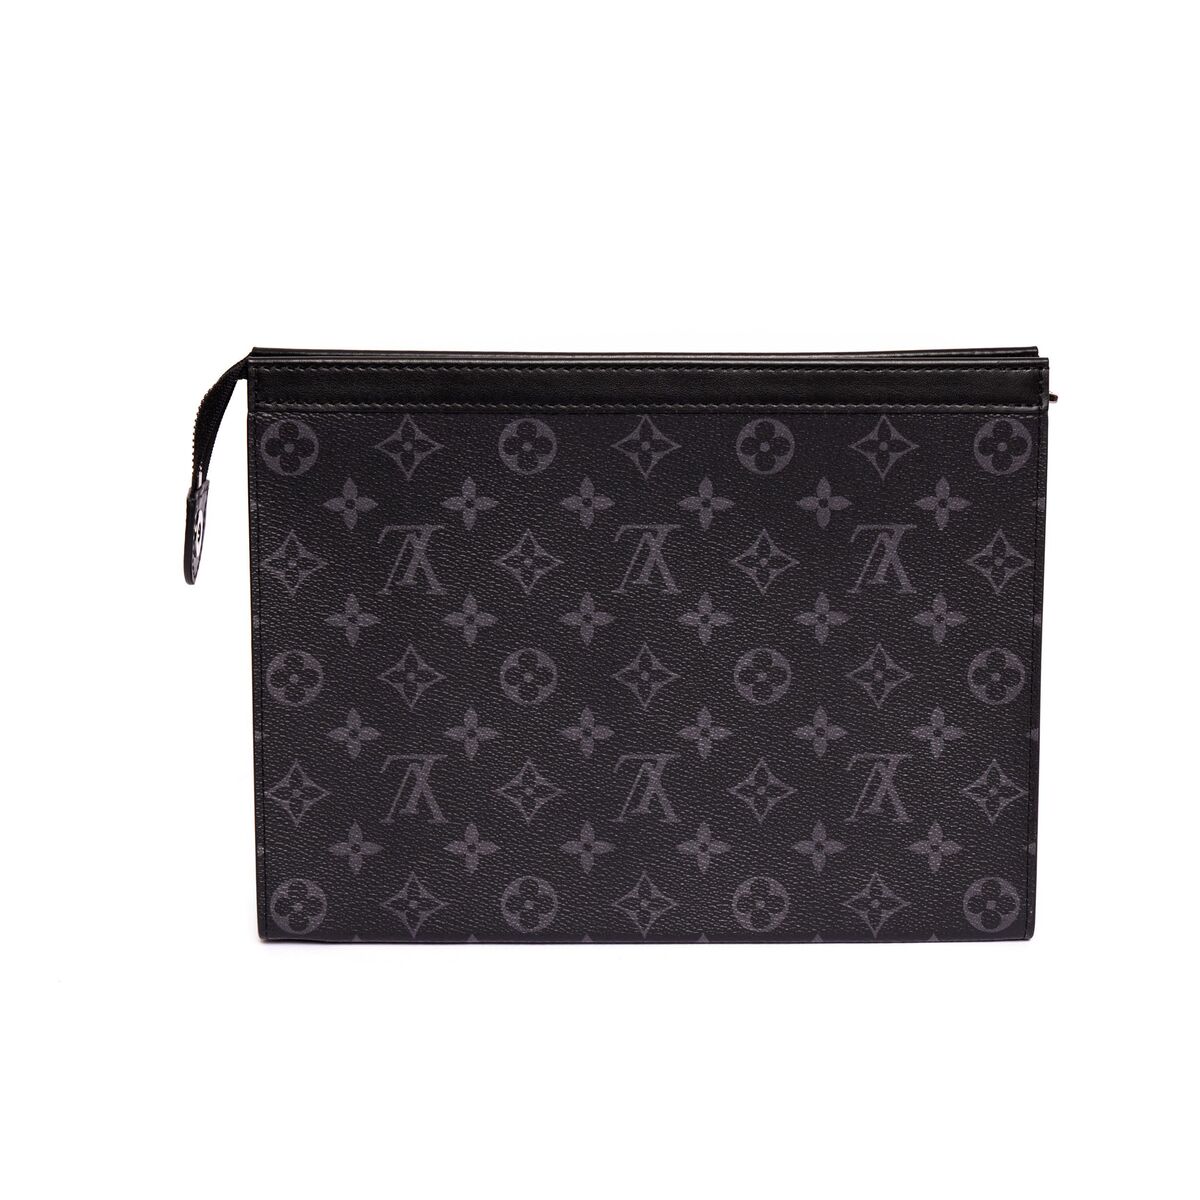 LOUIS VUITTON LIMITED EDITION COMIC TRUNK PRINTED MONOGRAM COIN